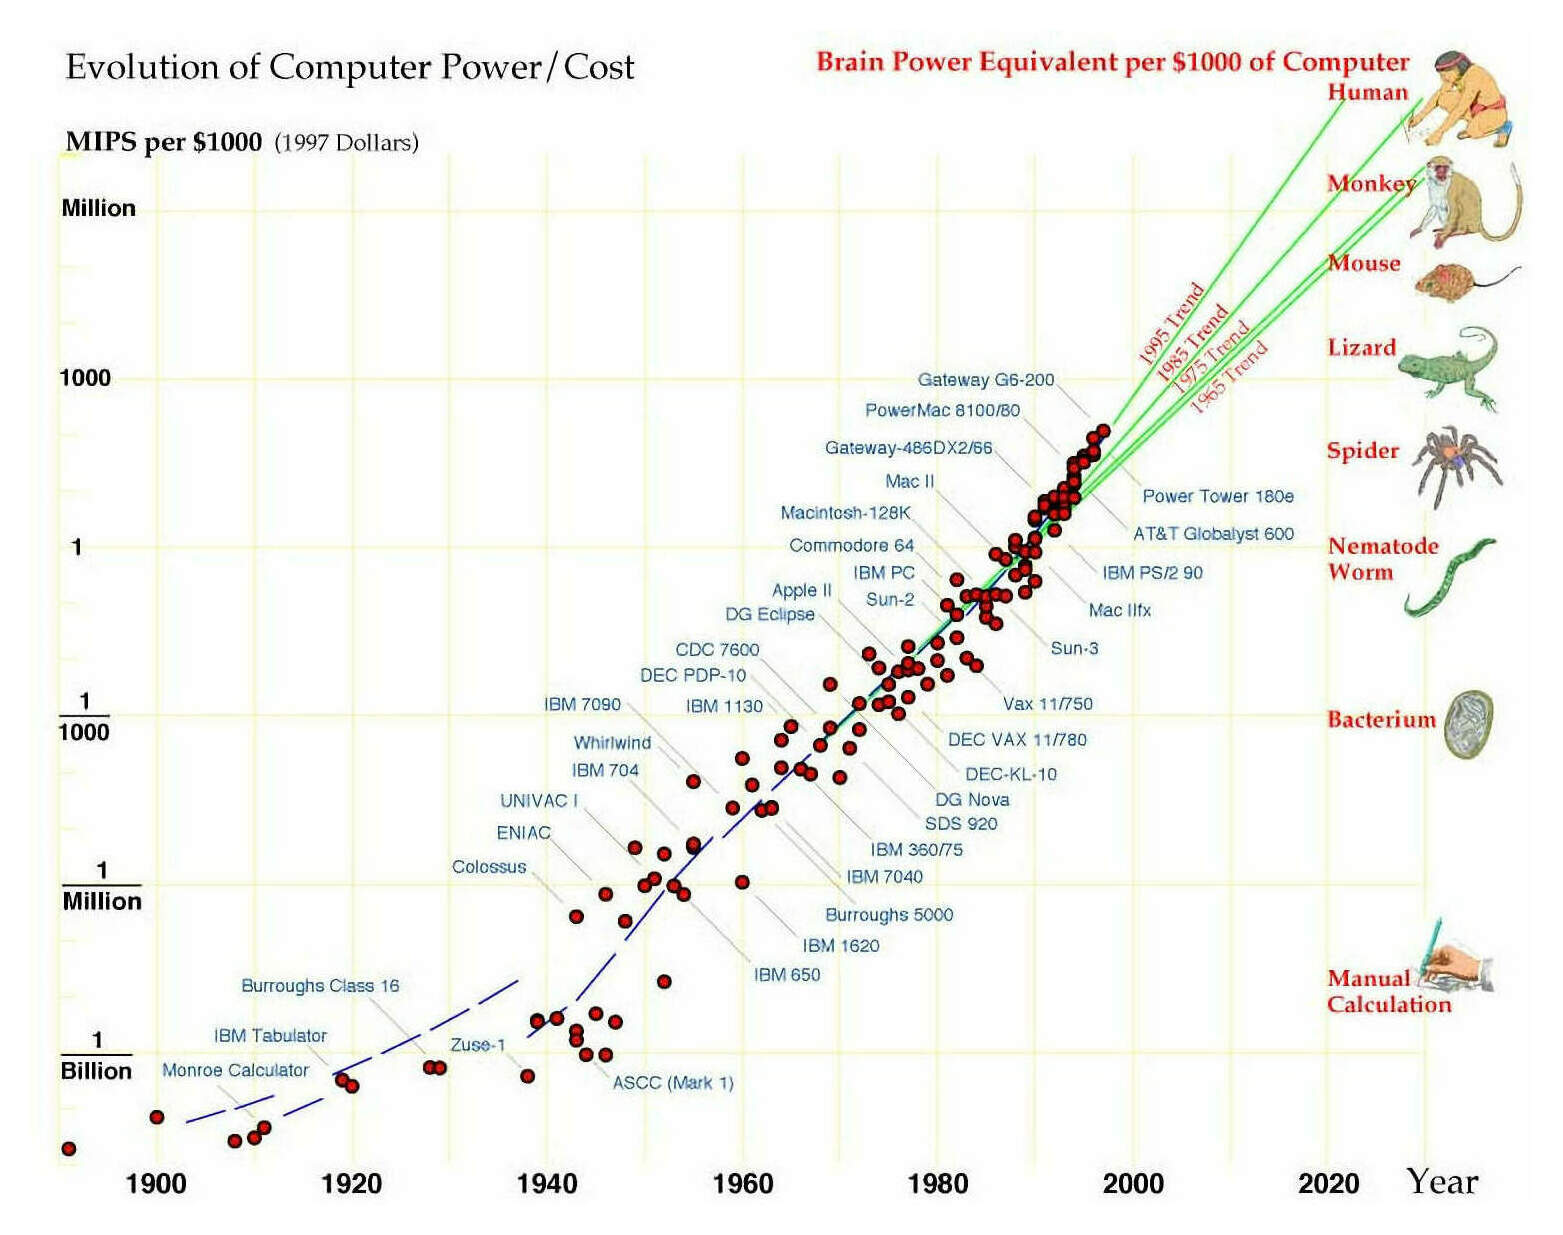 Faster than Exponential Growth in Computing Power: The number of MIPS in $1,956.1$1,000.01998 of computer from 1900 to the present. Steady improvements in mechanical and electromechanical calculators before World War II had increased the speed of calculation a thousandfold over manual methods from 1900 to 1940. The pace quickened with the appearance of electronic computers during the war, and 1940 to 1980 saw a million-fold increase. The pace has been even quicker since then, a pace which would make human-like robots possible before the middle of the next century. The vertical scale is logarithmic, the major divisions represent thousandfold increases in computer performance. Exponential growth would show as a straight line, the upward curve indicates faster than exponential growth, or, equivalently, an accelerating rate of innovation. The reduced spread of the data in the 1990s is probably the result of intensified competition: underperforming machines are more rapidly squeezed out. The numerical data for this power curve are presented in the appendix.